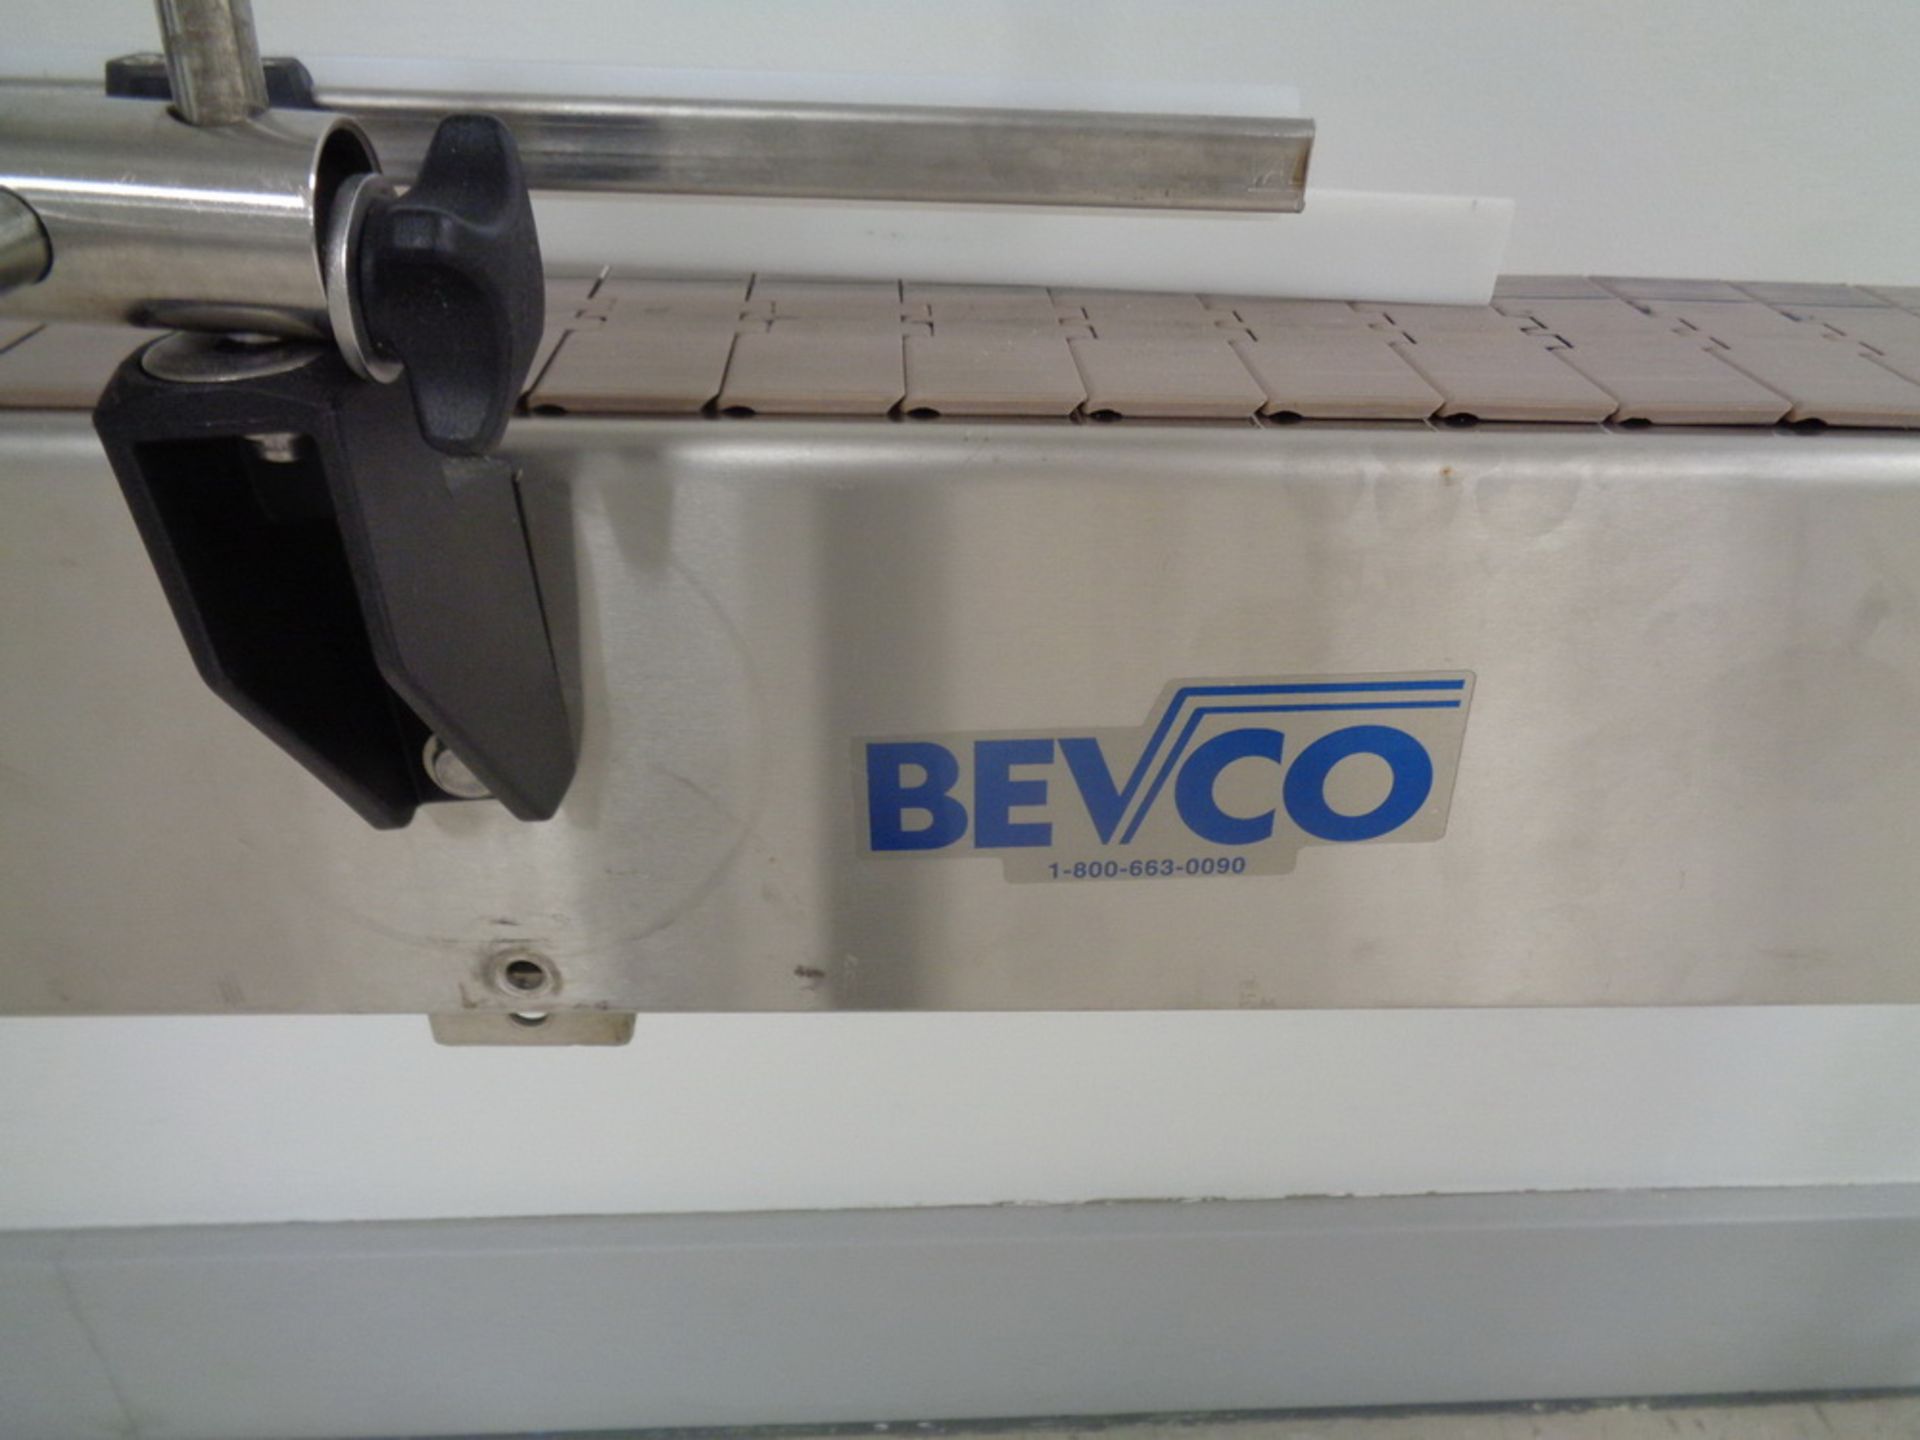 BEVCO TABLE TOP CHAIN CONVEYOR SECTION, 4.5” WIDE X 10’ LONG, STAINLESS STEEL CONSTRUCTION - Image 2 of 4